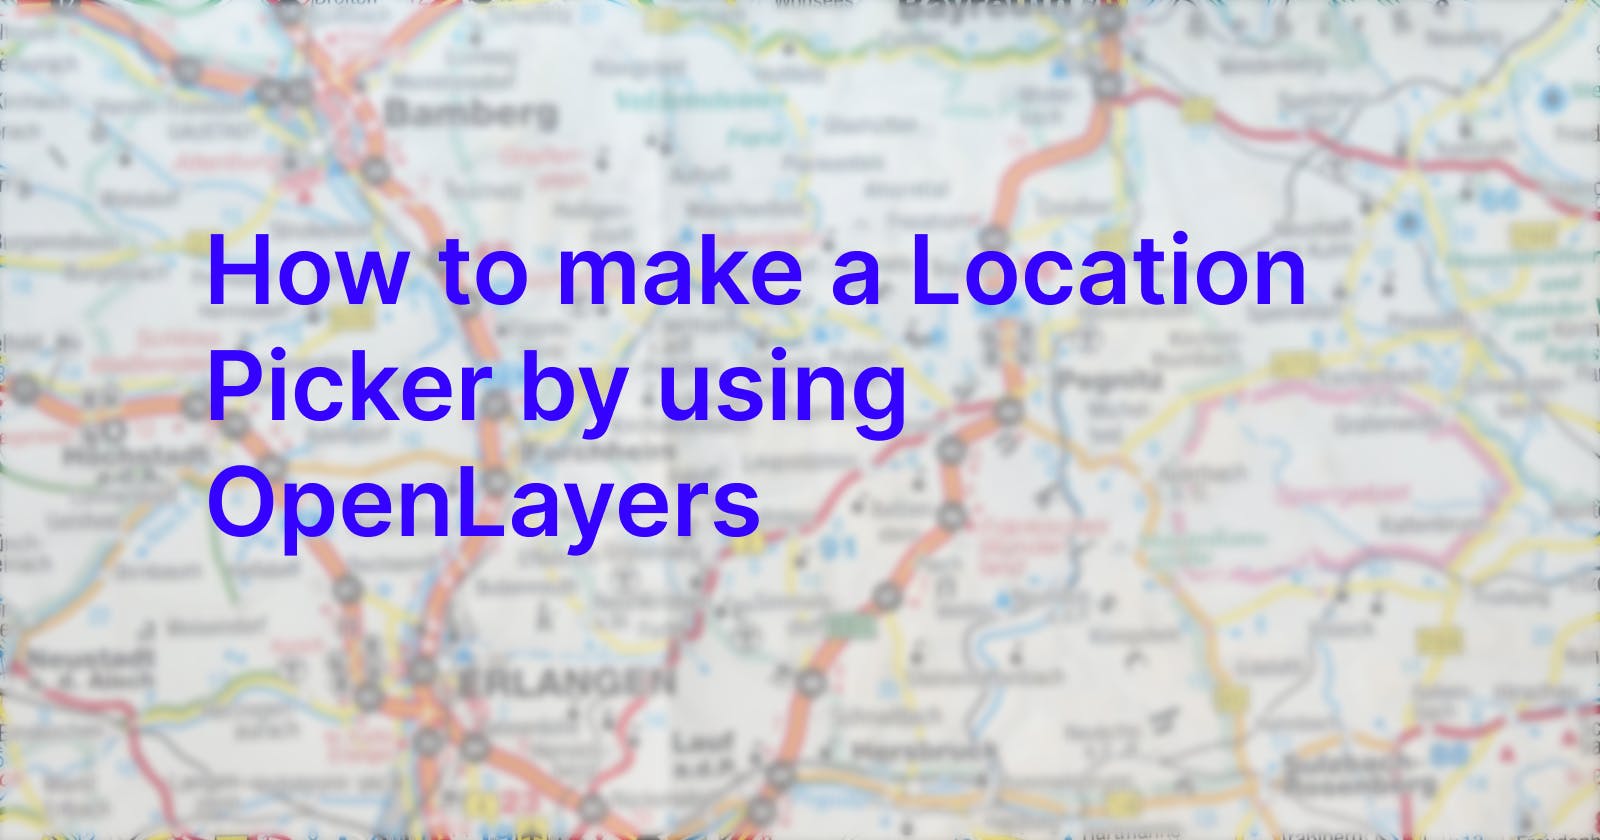 How to make a Location Picker with using OpenLayers